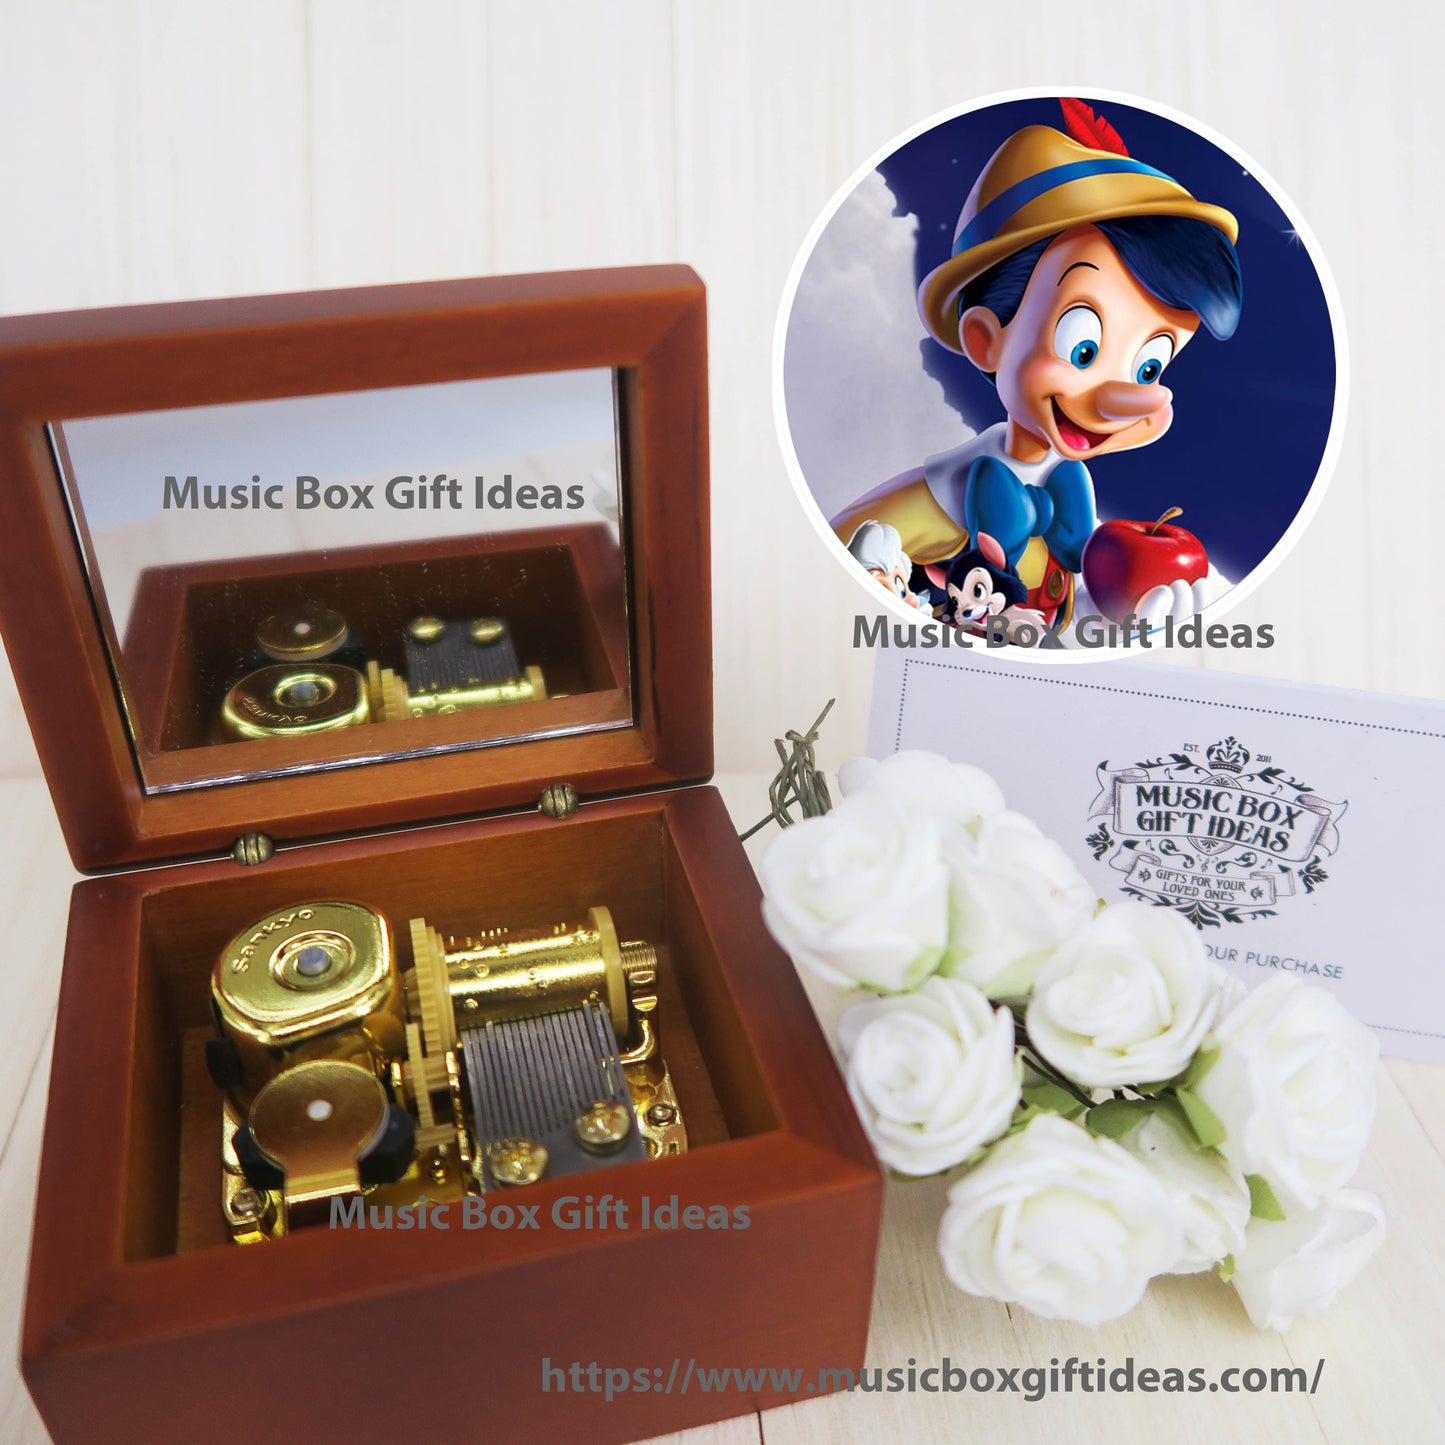 Disney Pinocchio Soundtrack When You Wish Upon A Star 18-Note Music Box Gift (Wooden Clockwork) - Music Box Gift Ideas